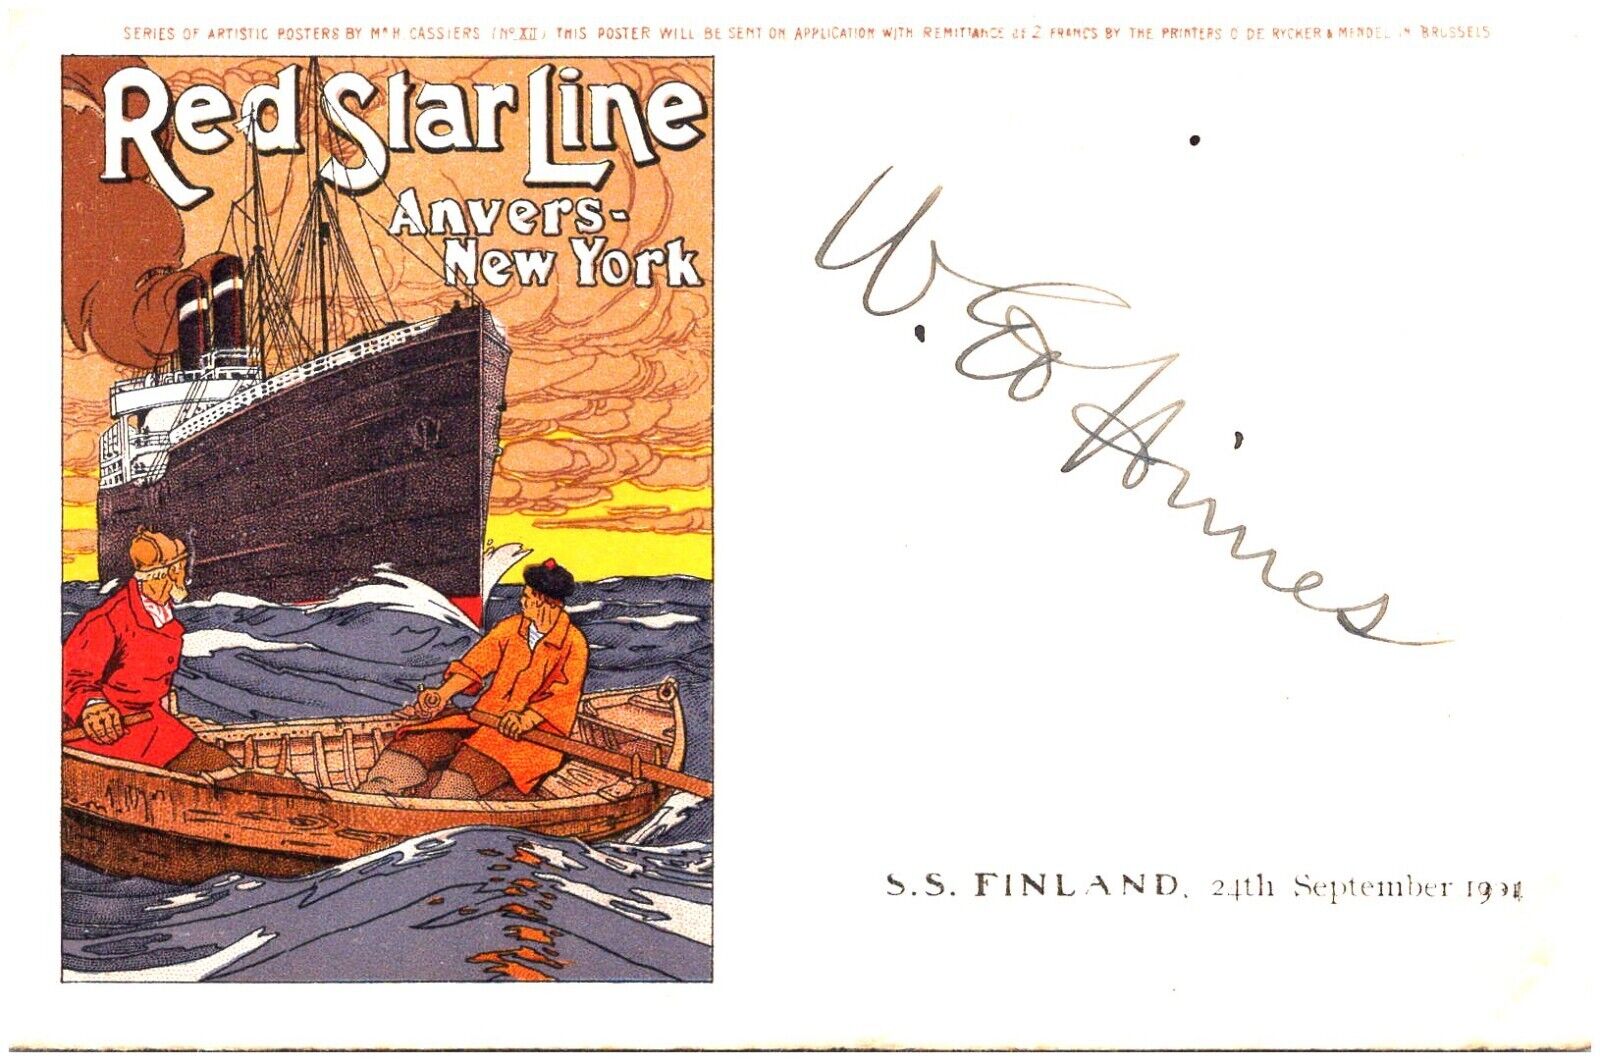 SS Finland Private Mailing Card Poster Image by H. Cassiers,  New York-Antwerp